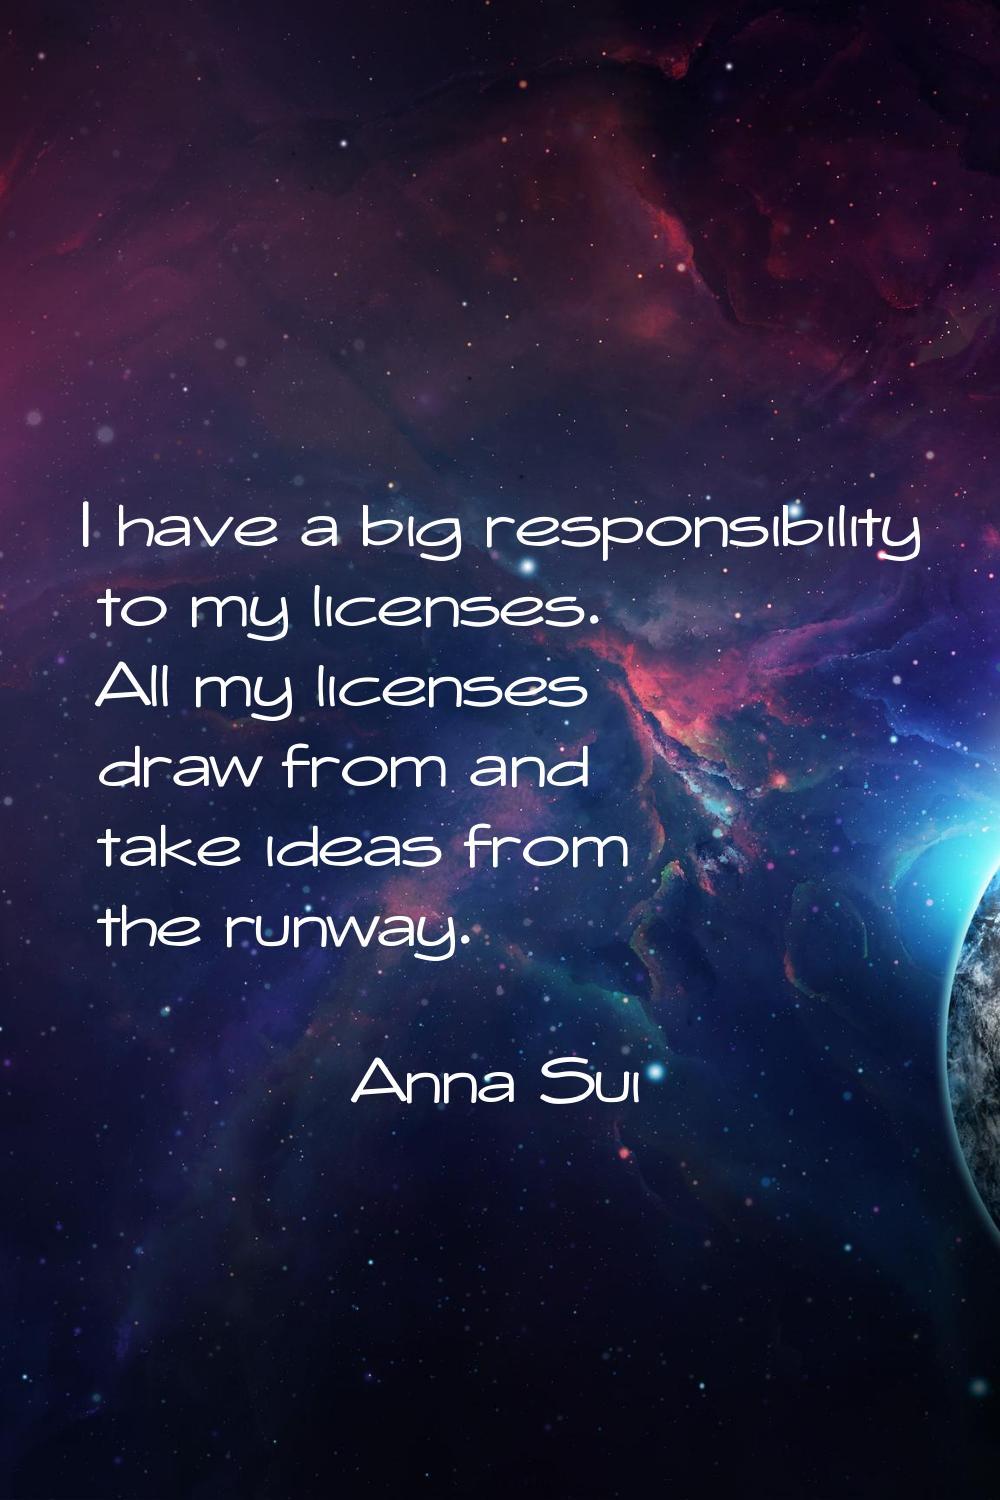 I have a big responsibility to my licenses. All my licenses draw from and take ideas from the runwa